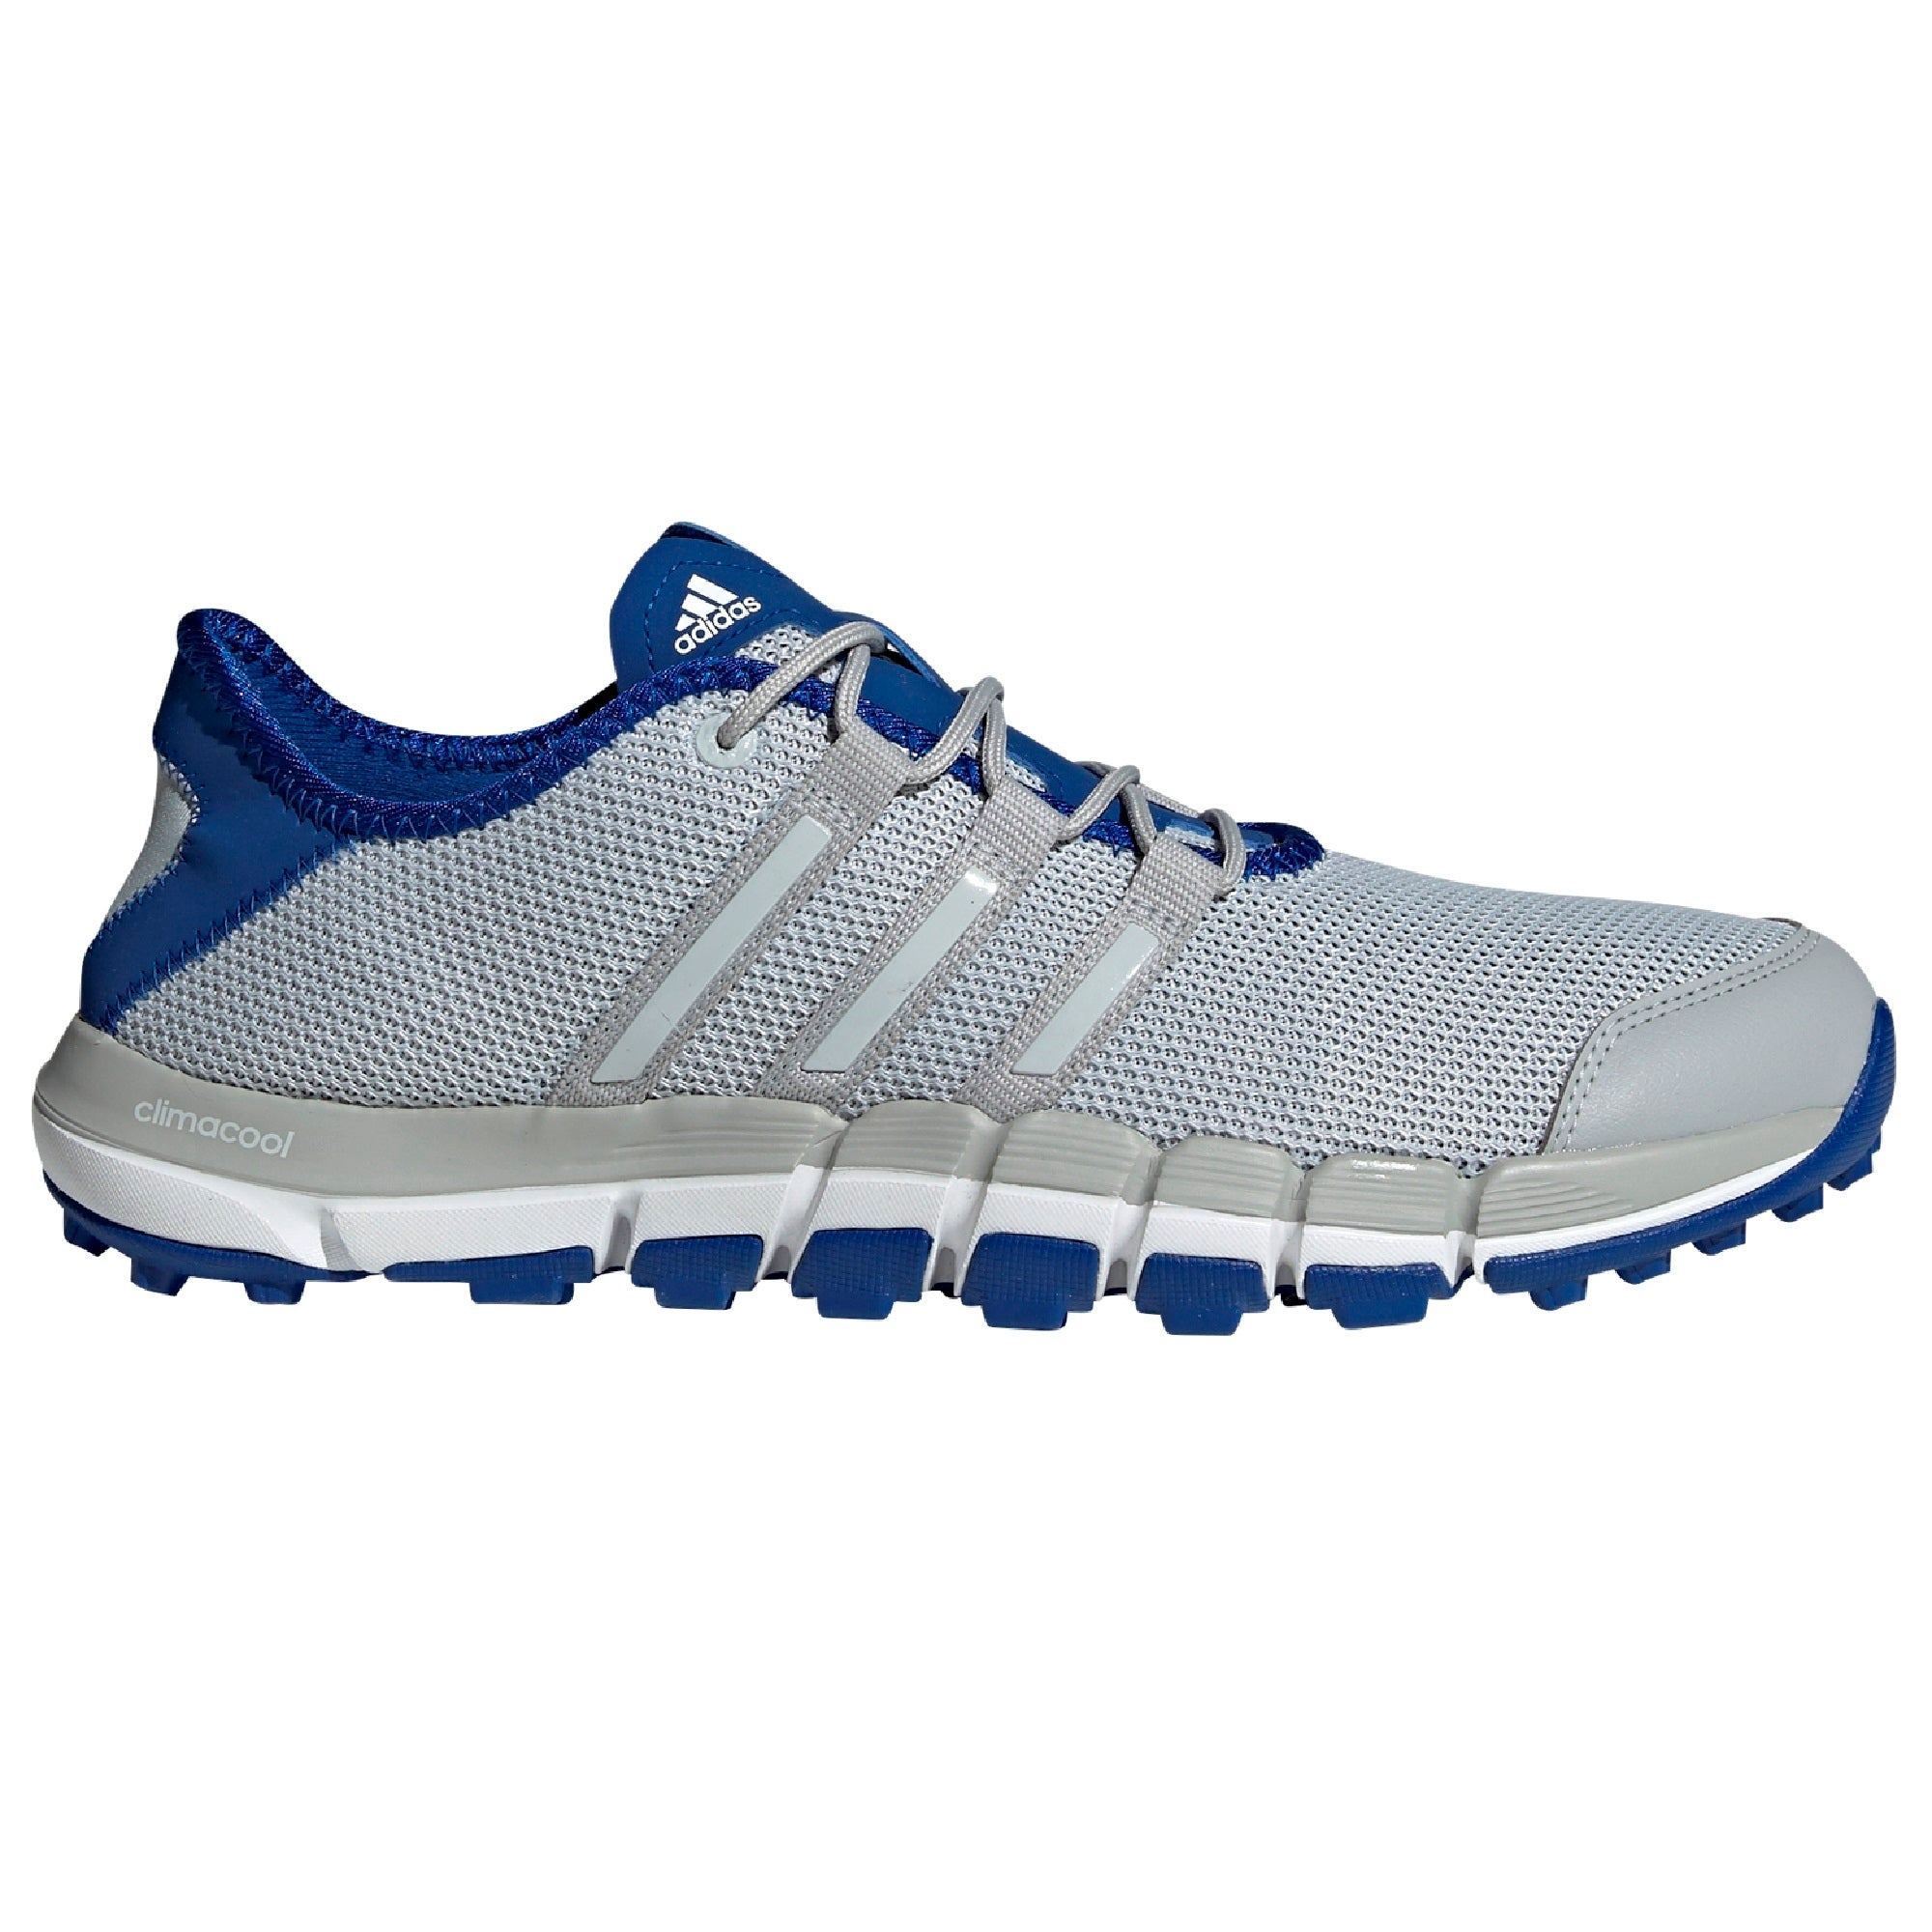 adidas ClimaCool ST Golf Shoes